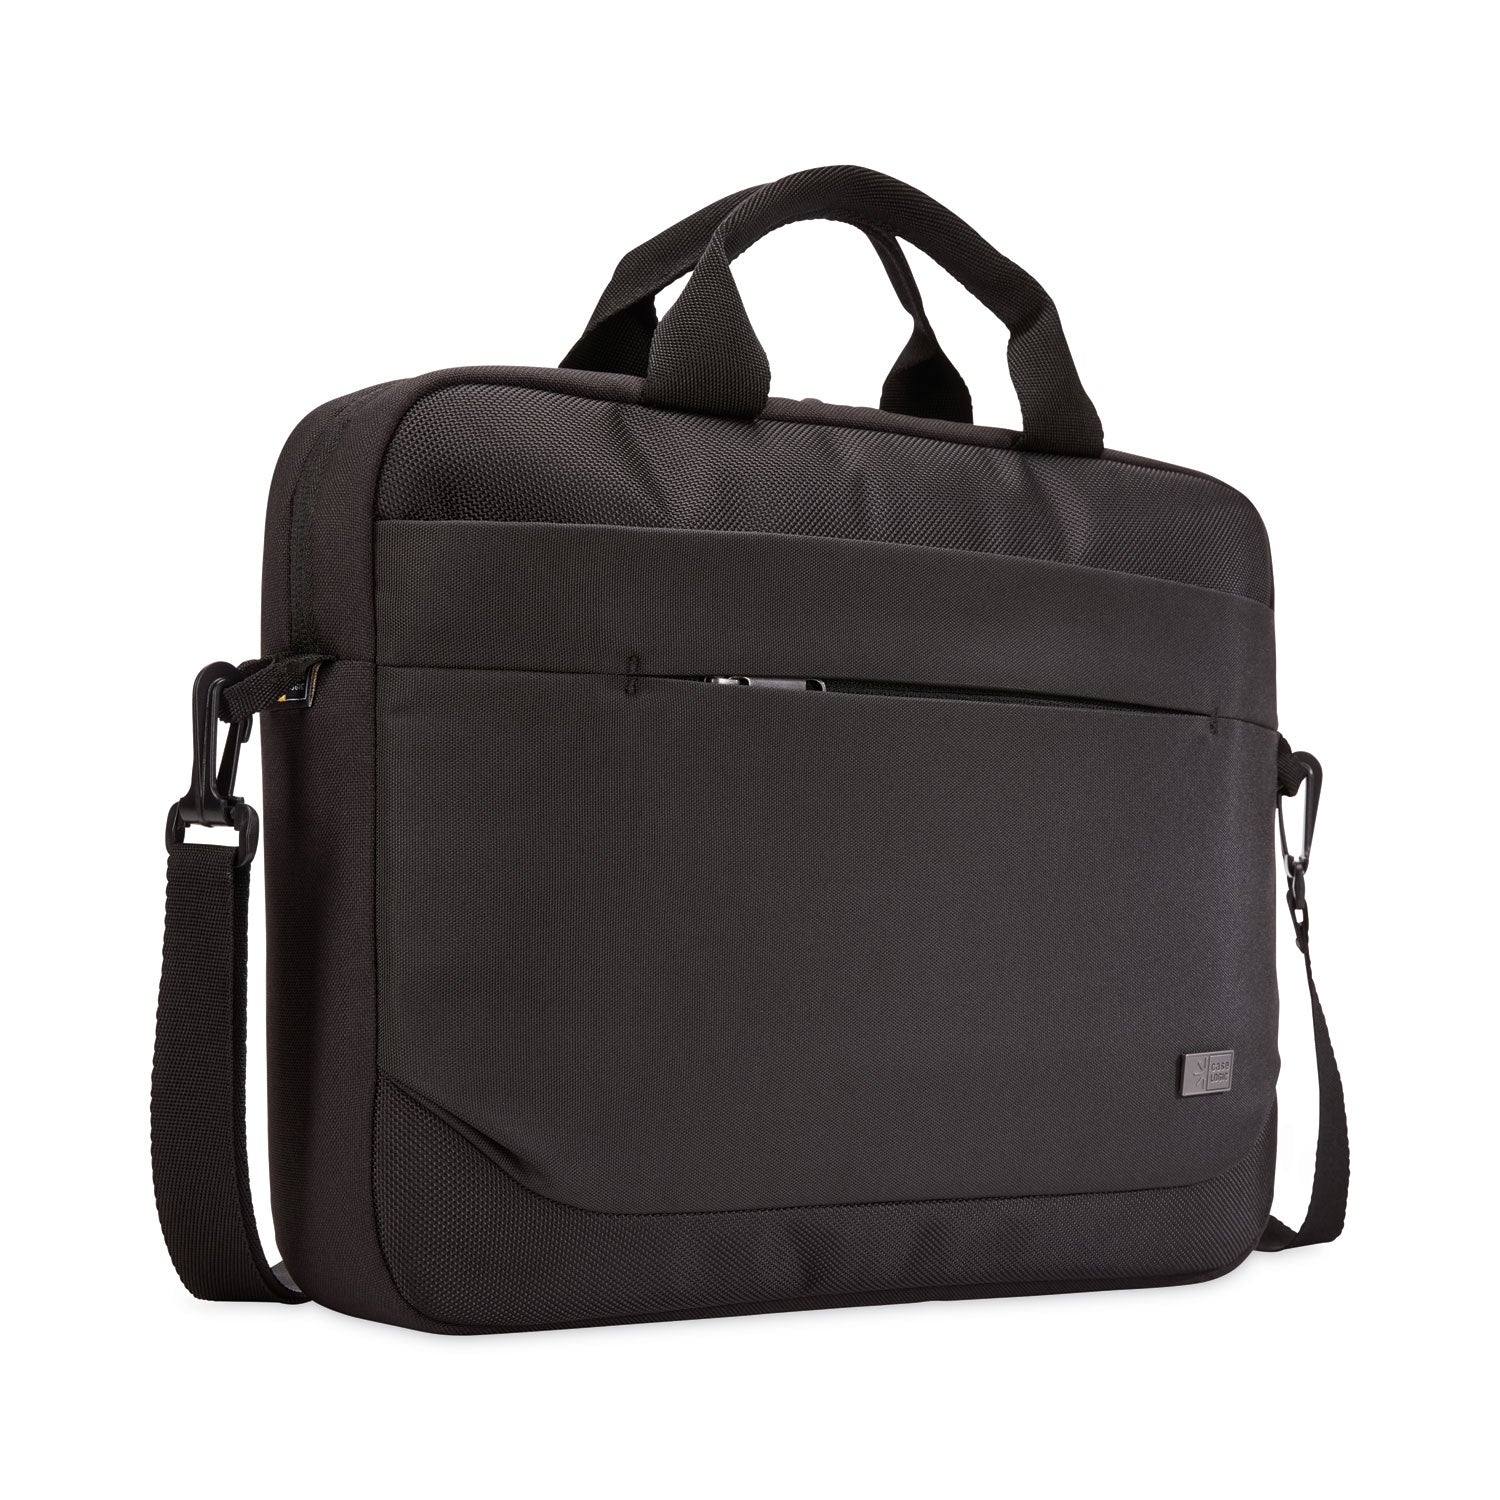 advantage-laptop-attache-fits-devices-up-to-14-polyester-146-x-28-x-13-black_clg3203986 - 2